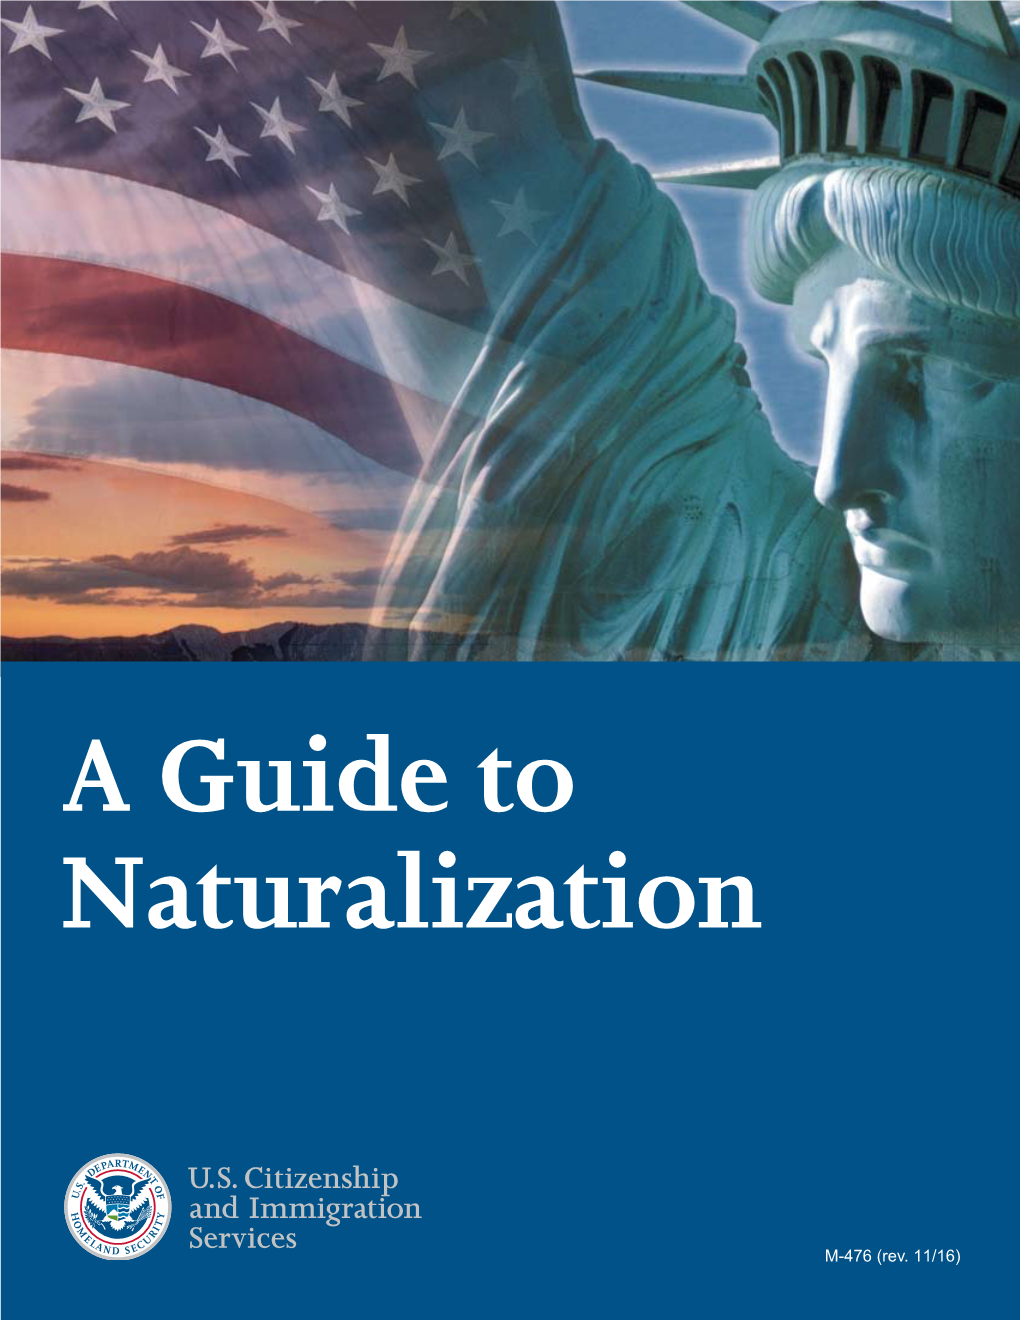 M-476, a Guide to Naturalization, and the Form N-400, Application for Naturalization Instructions